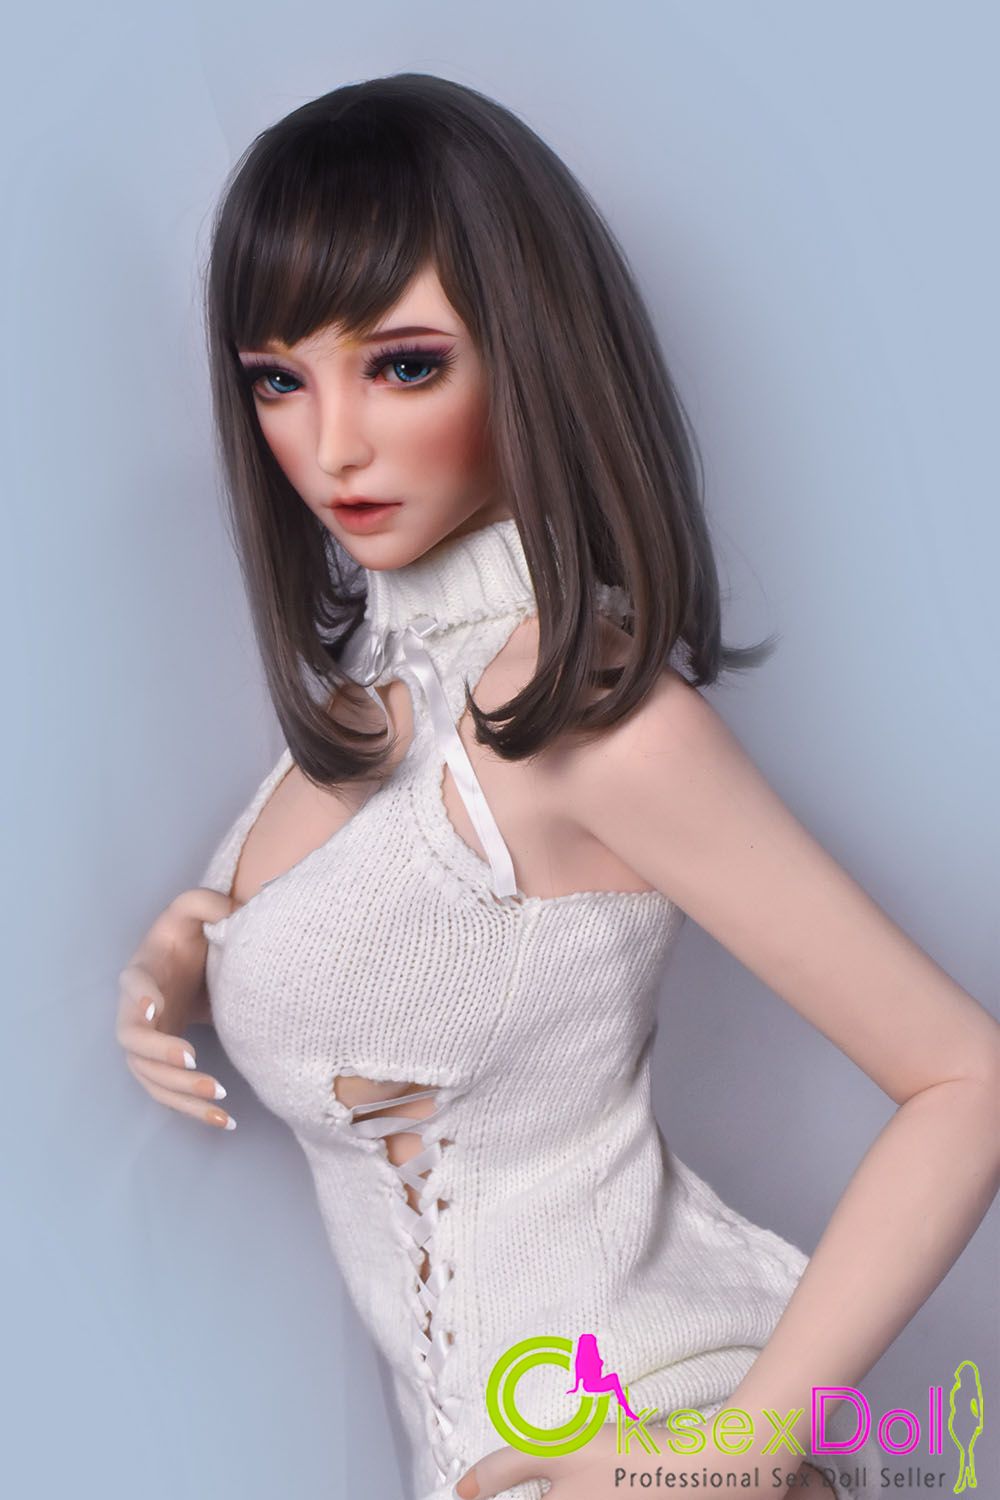 elsababe-doll.html F-cup Sex Dolls Pictures